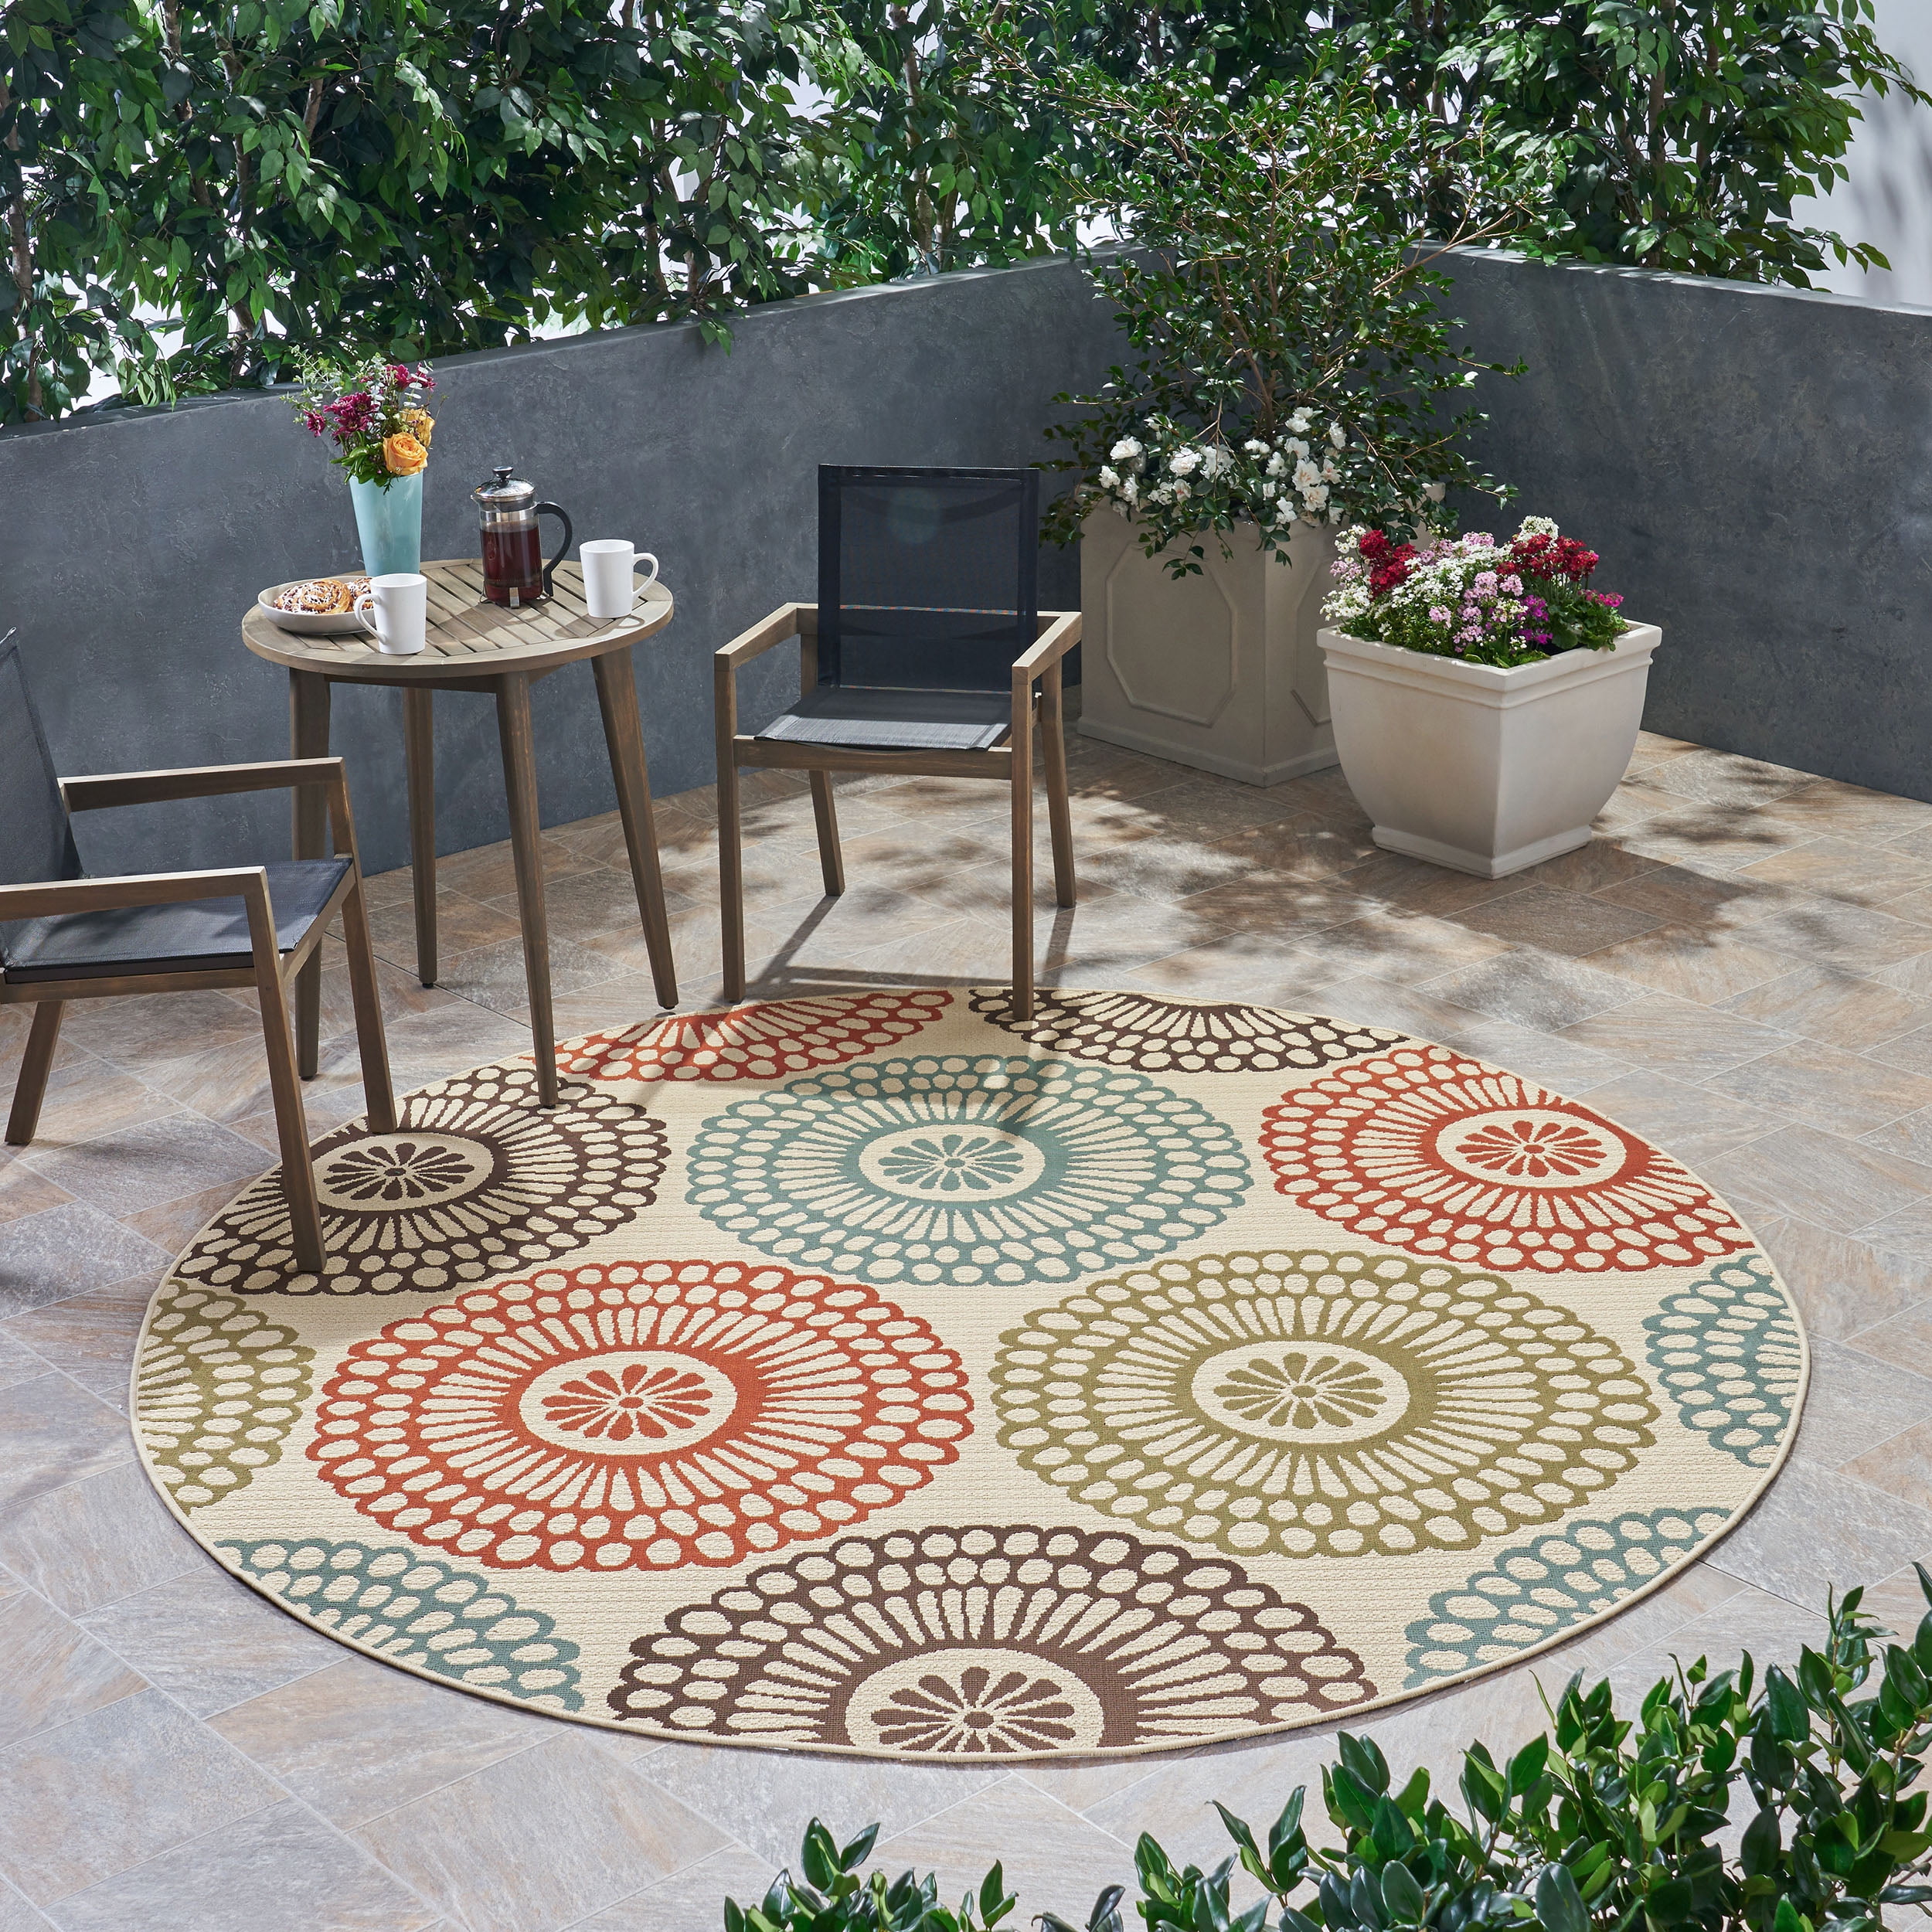 710 Round Rug The Foyer Can Become A Dramatic Entry To A Home With